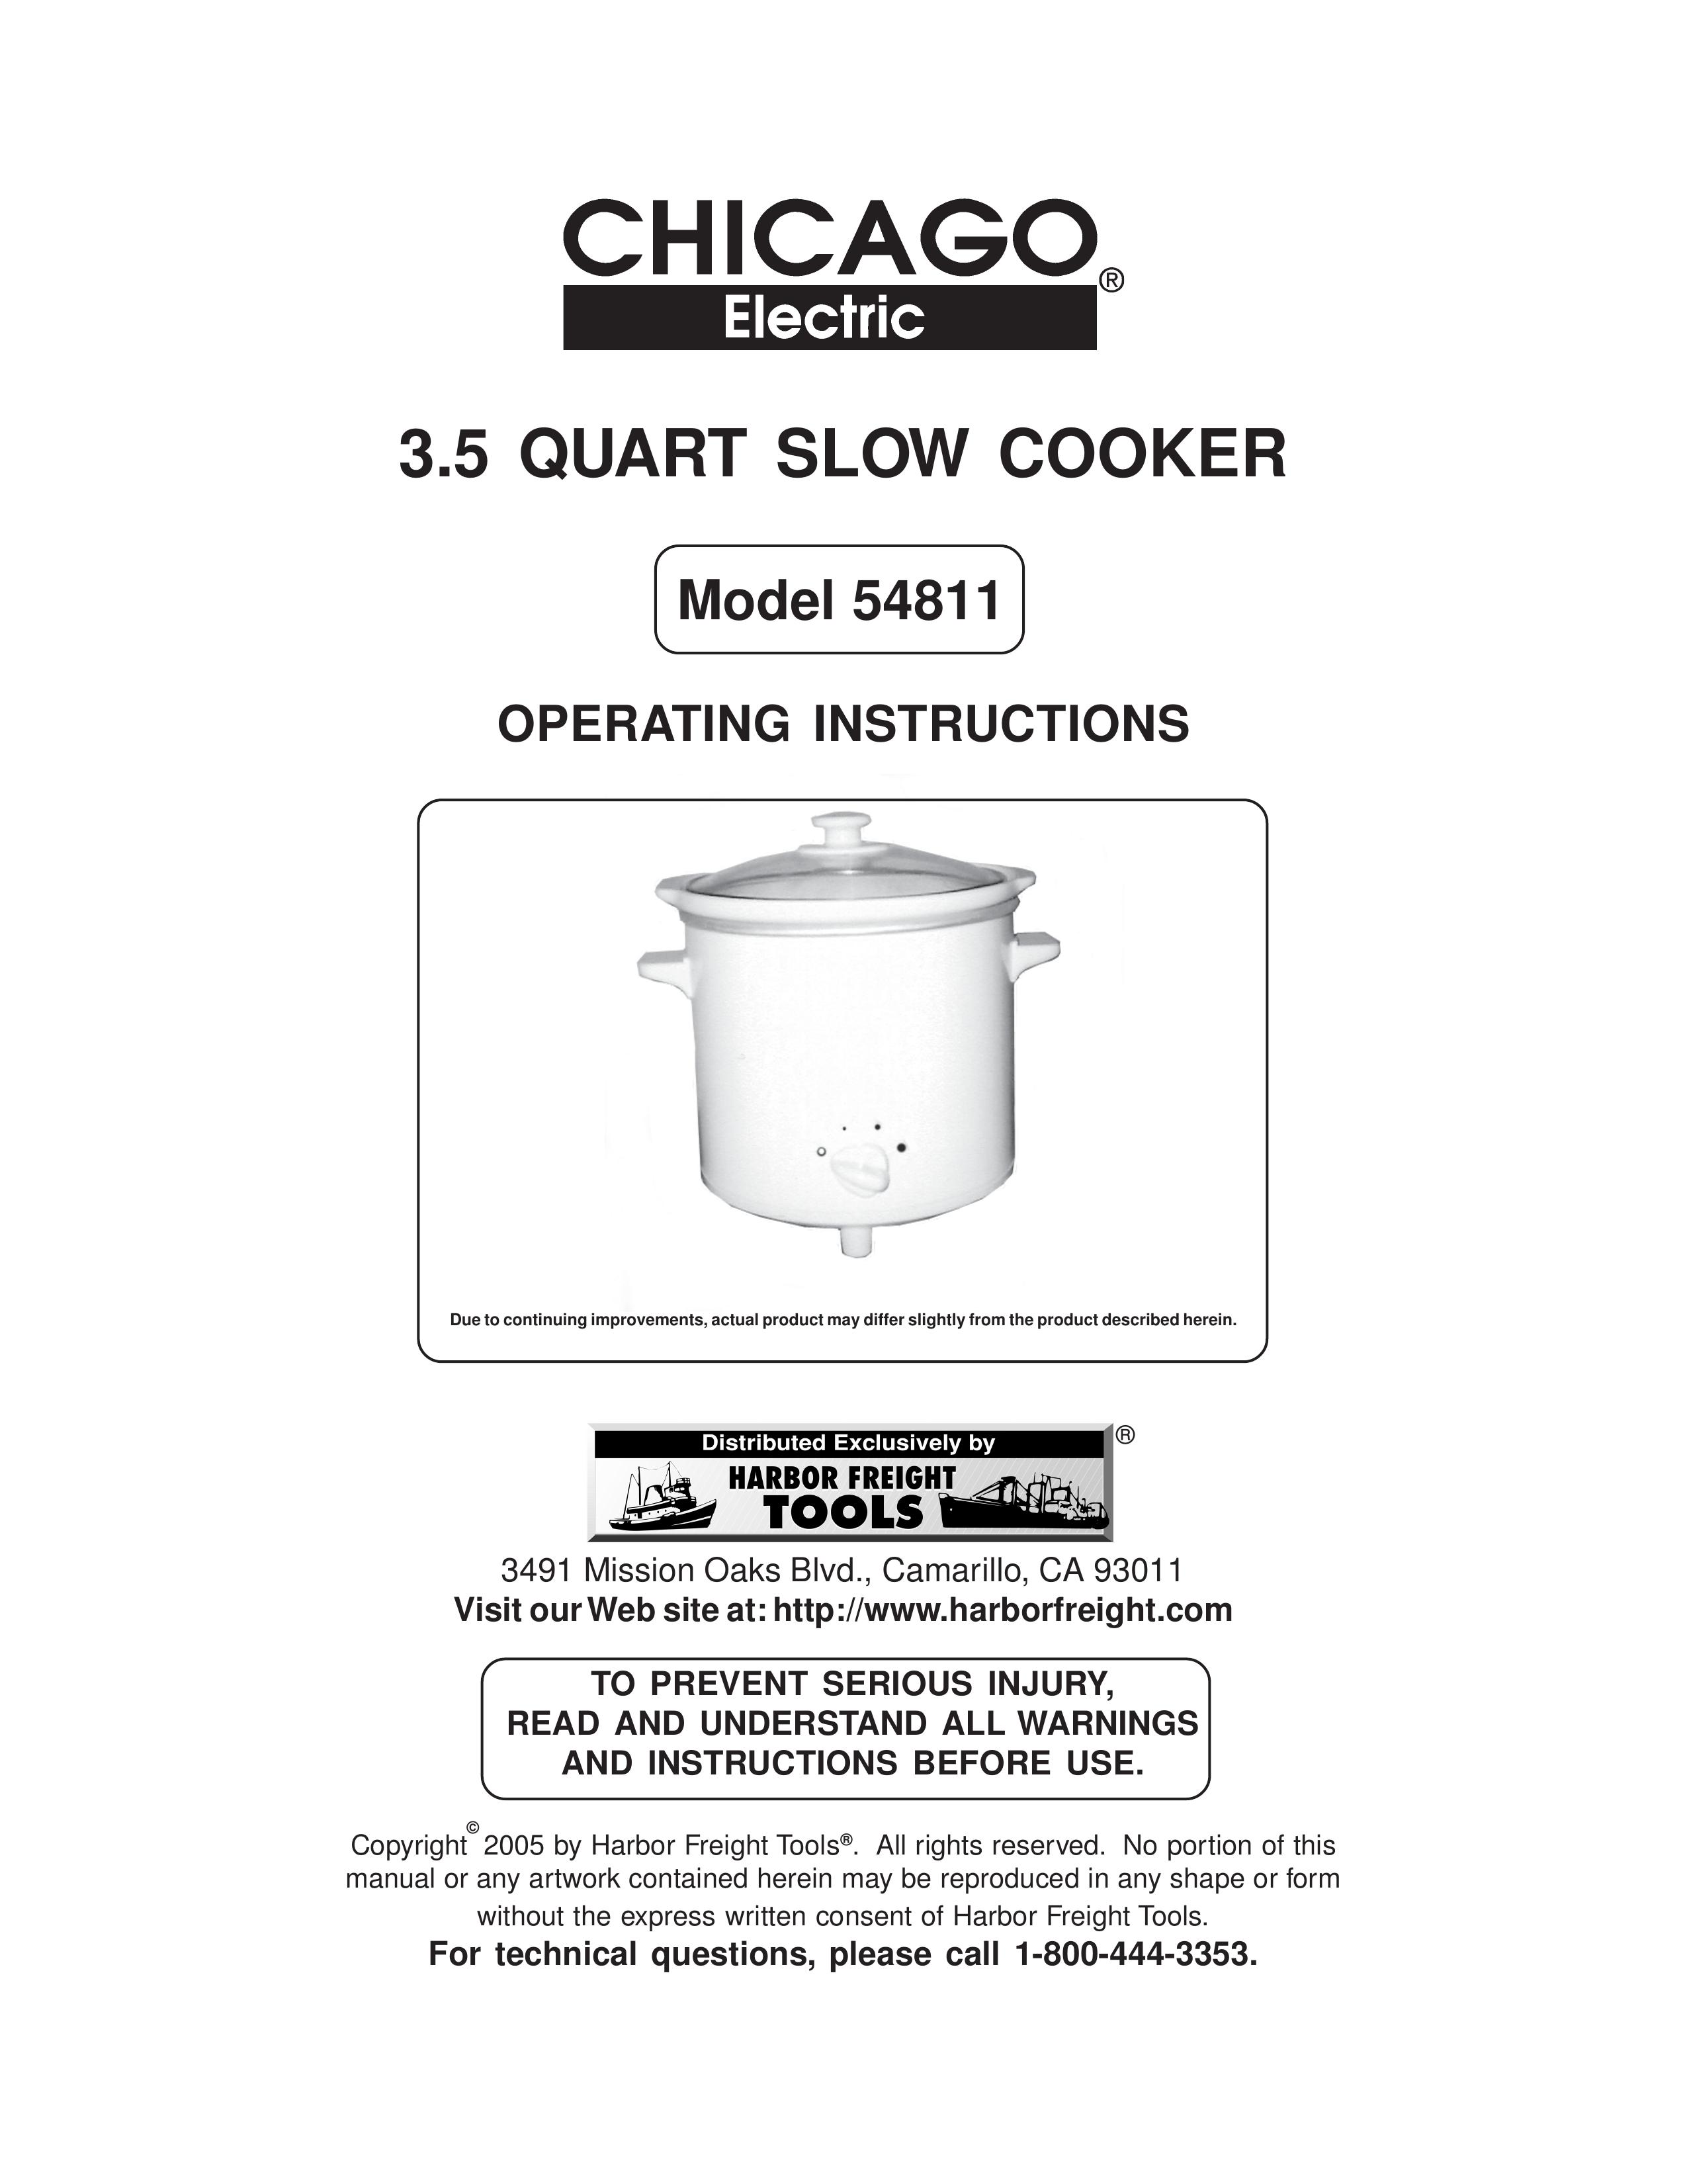 Chicago Electric 54811 Slow Cooker User Manual